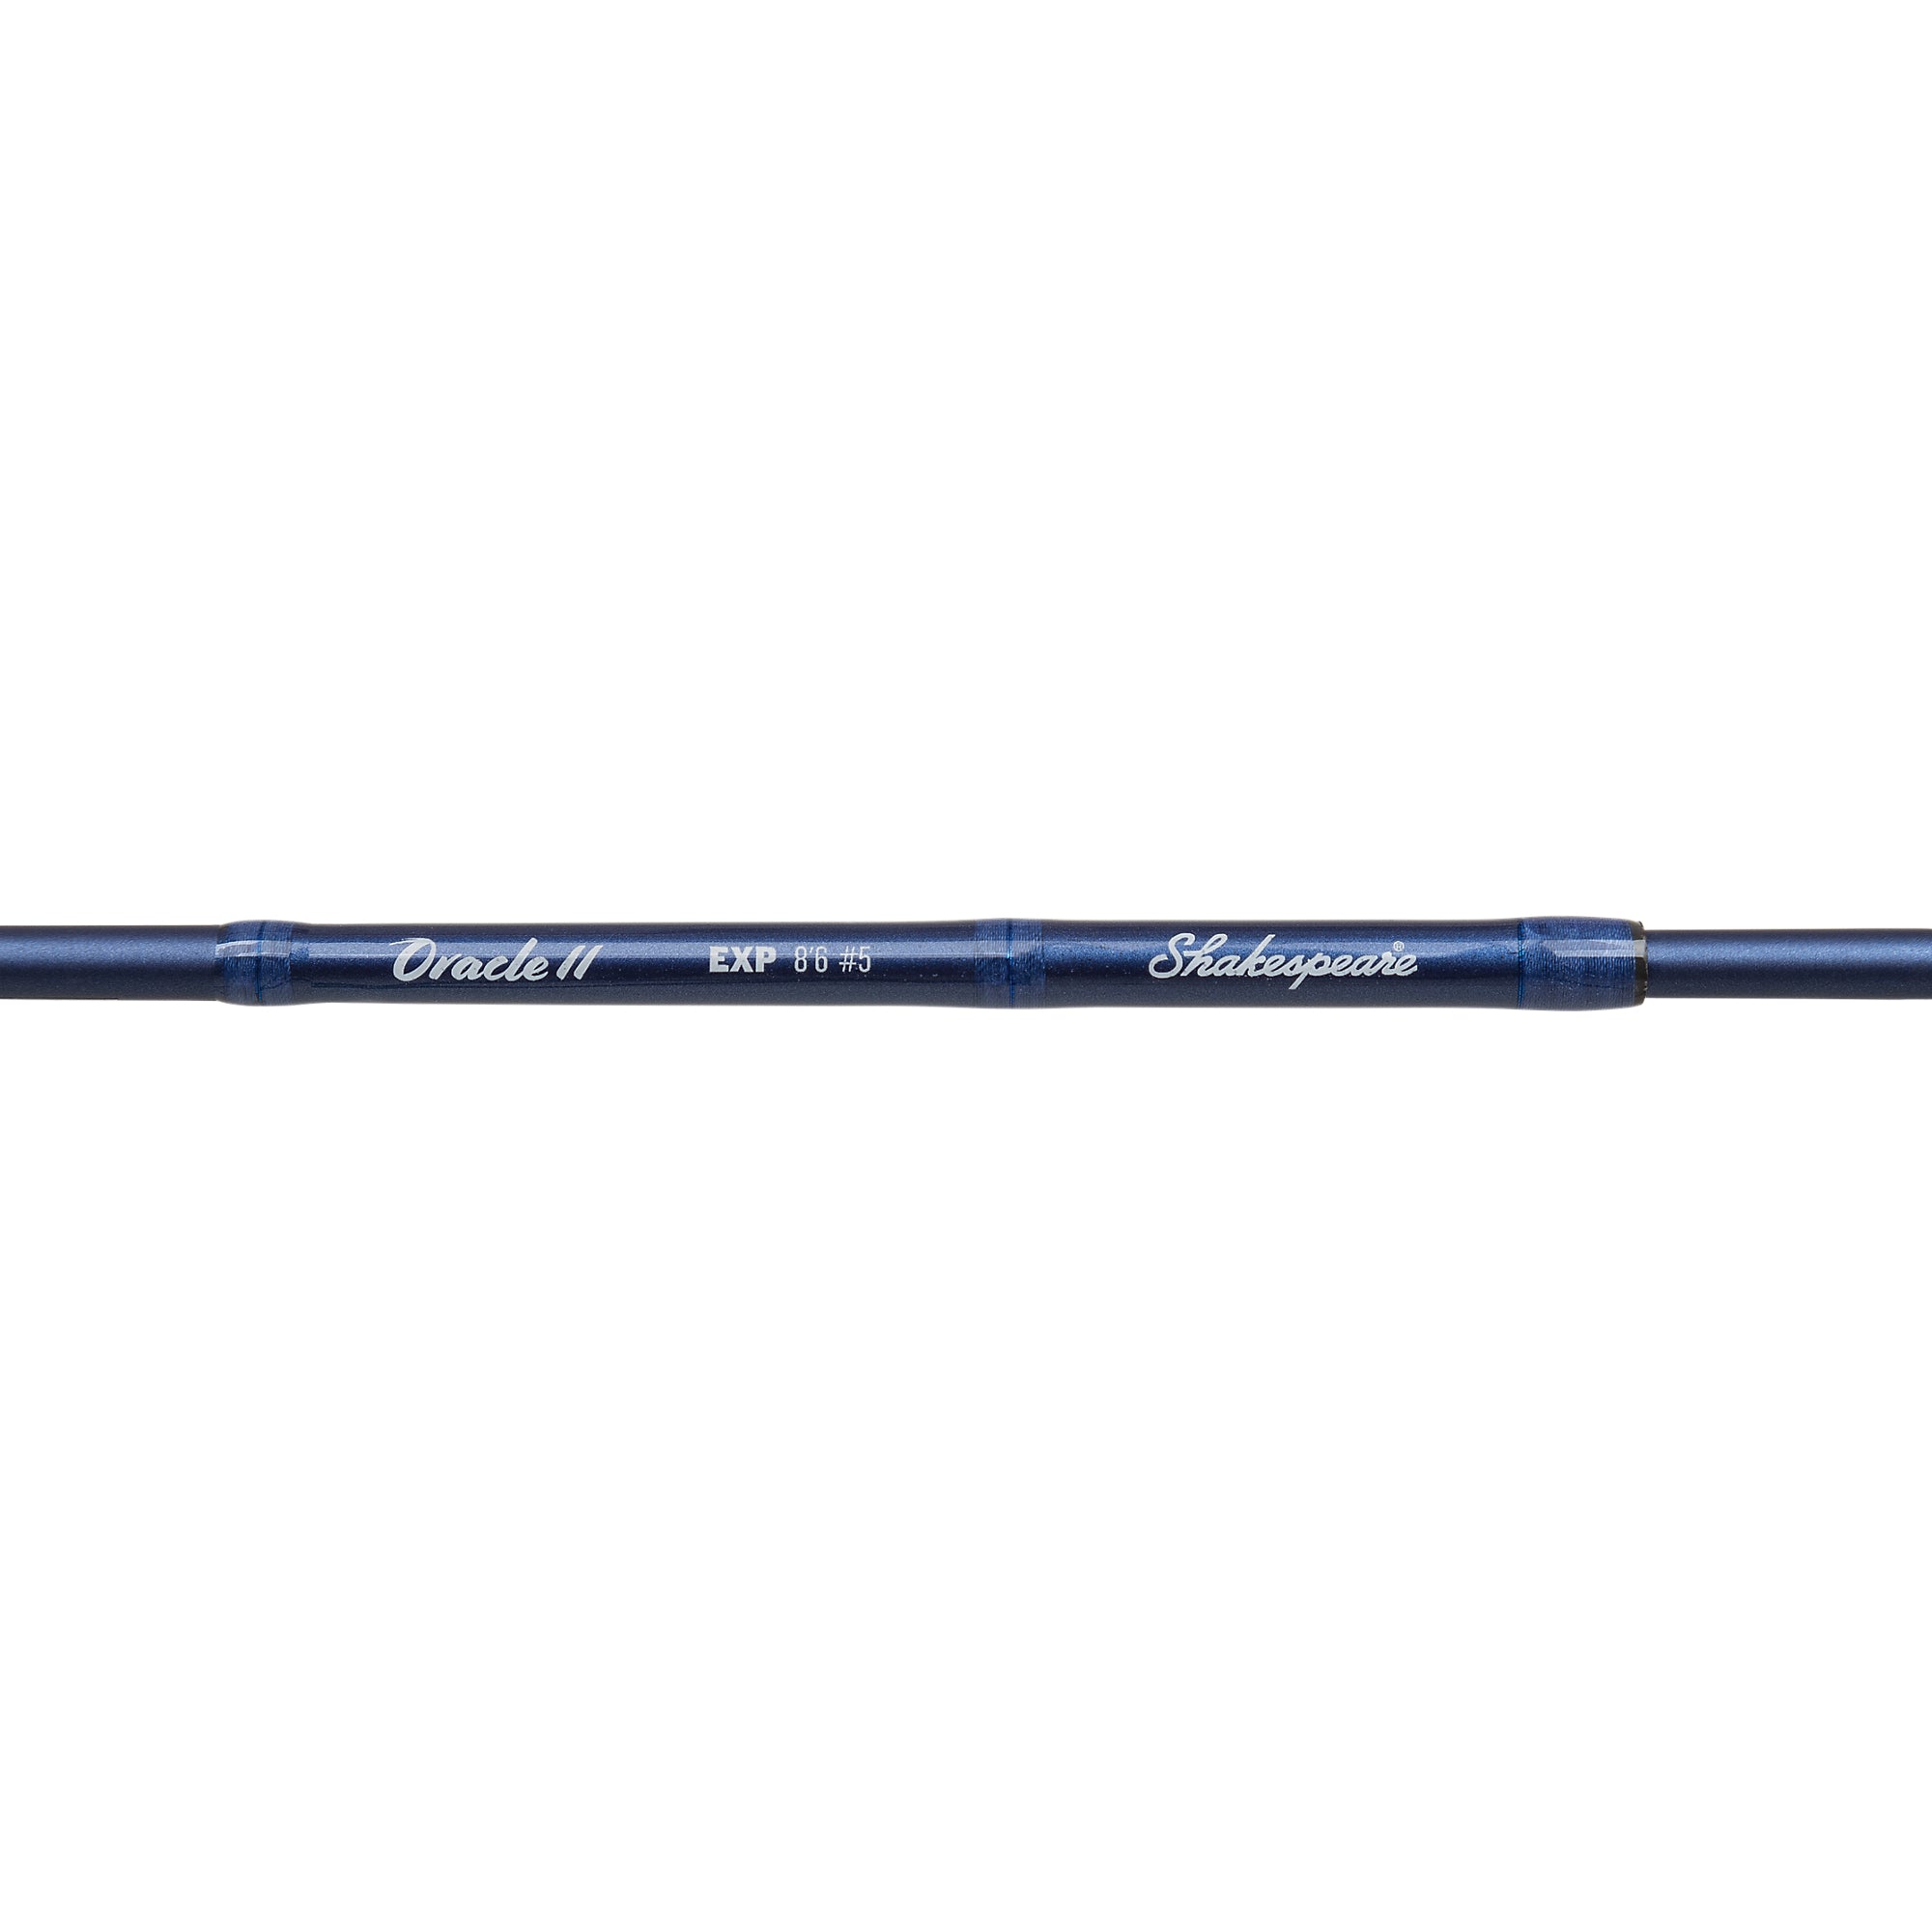 SHAKESPEARE ORACLE 2 EXP FLY RODS